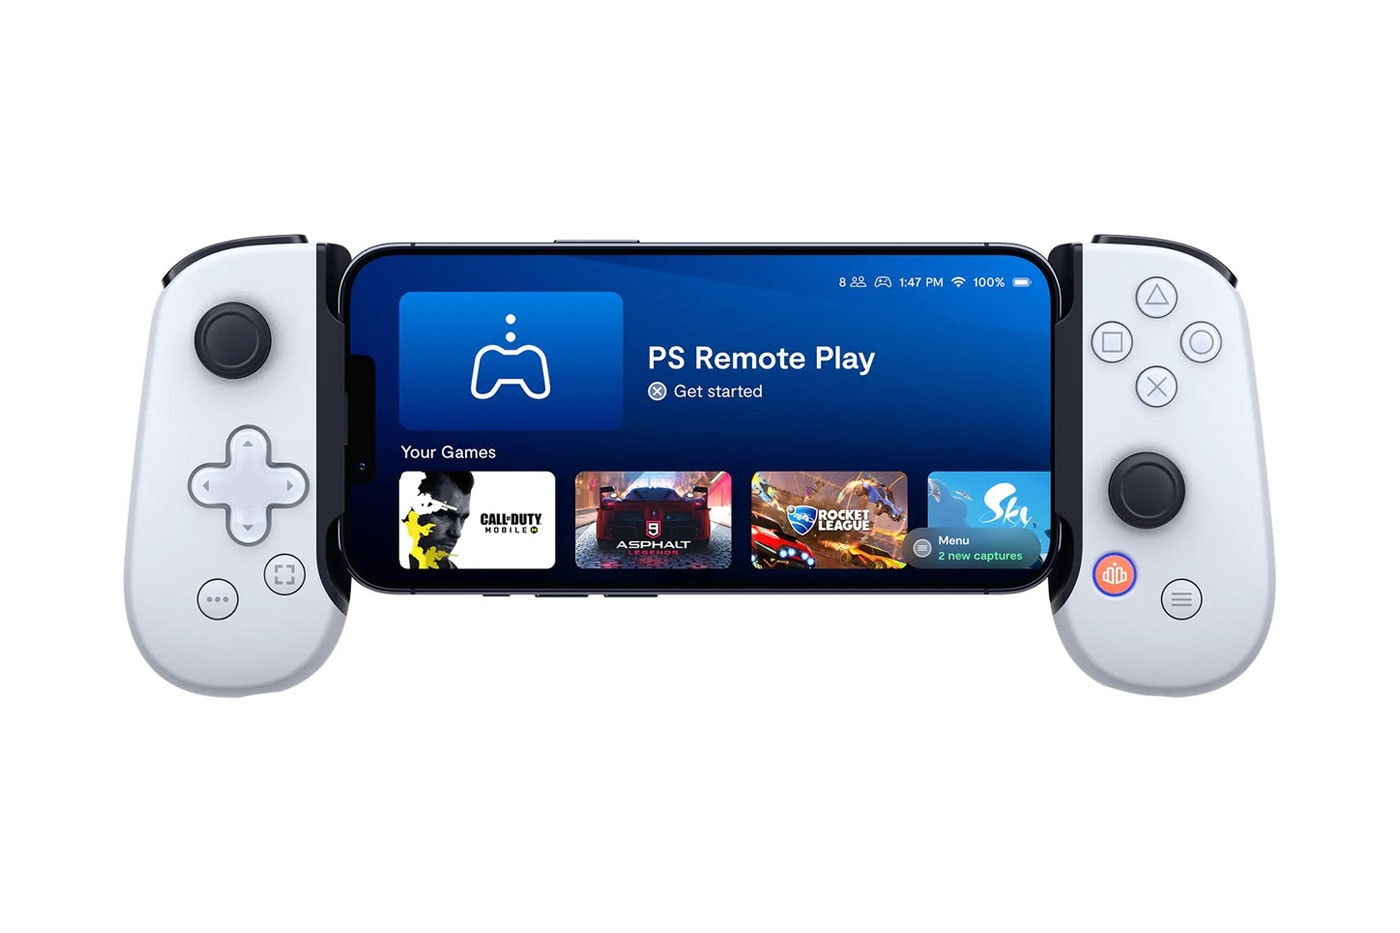 Sony Playstation backbone iphone mobile controller transparent face buttons release info date price 